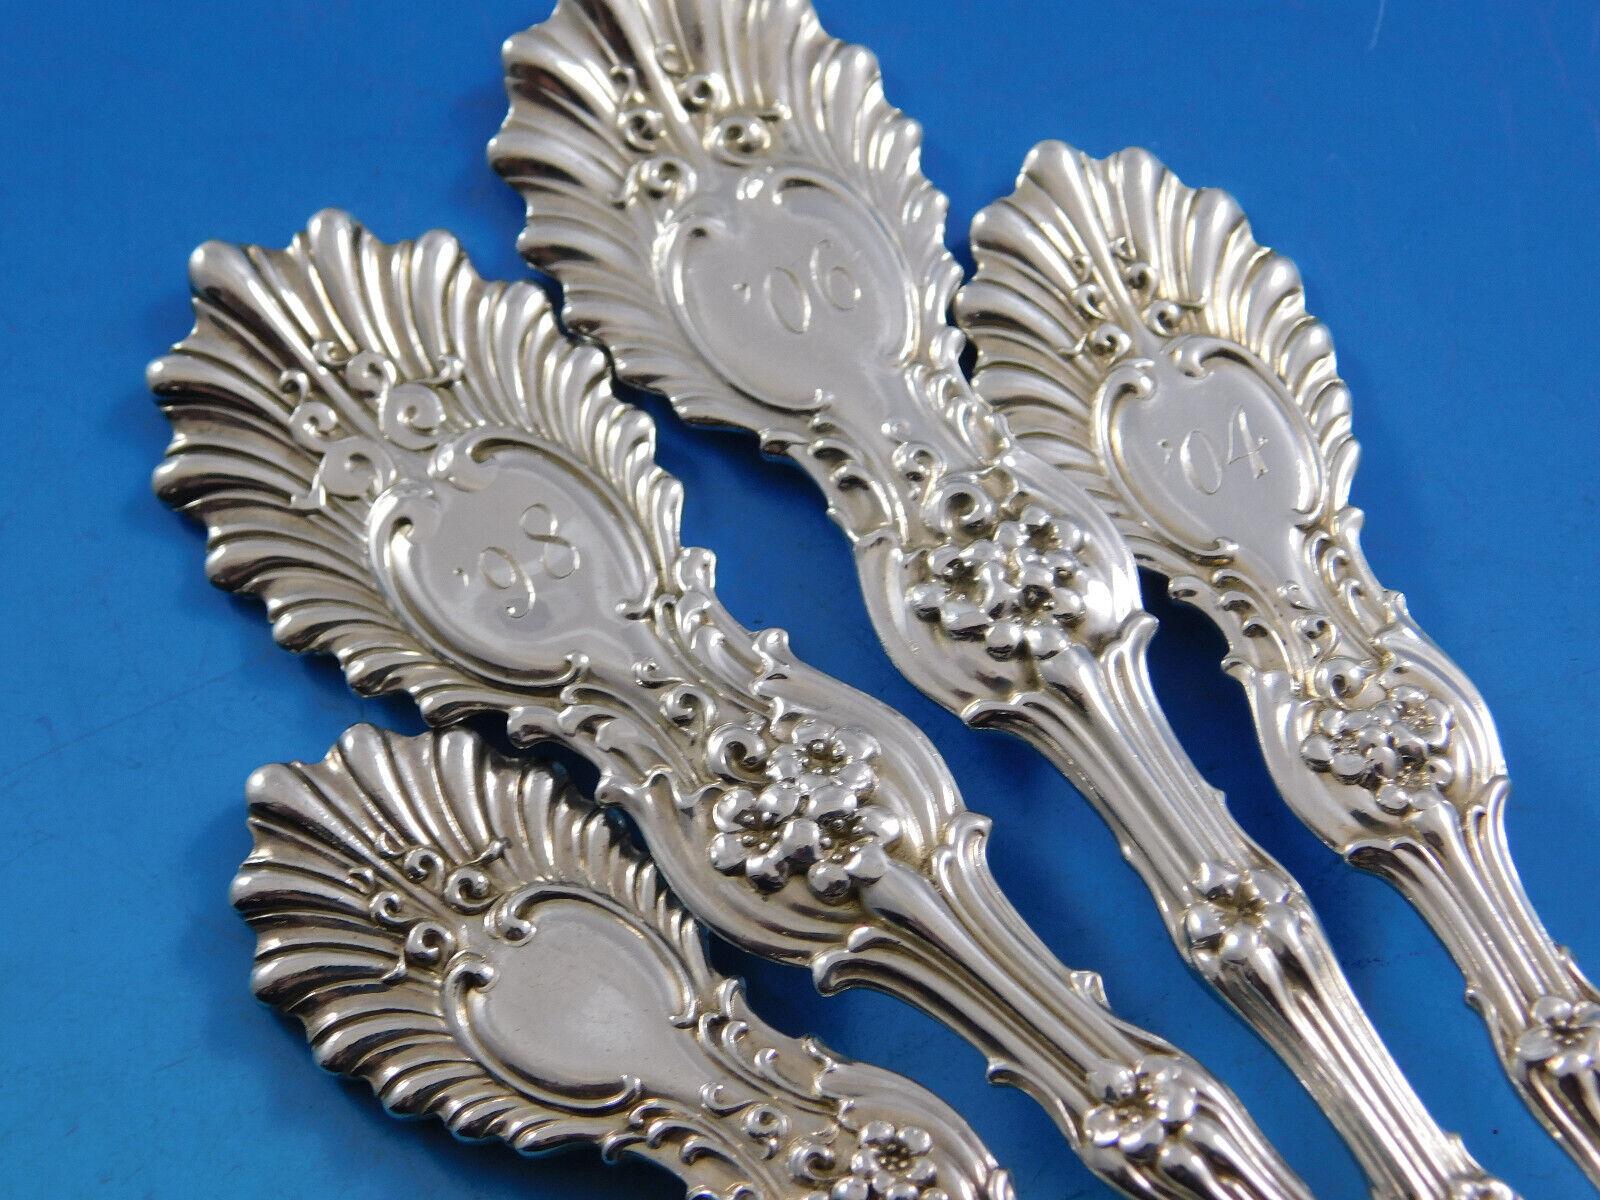 Rare Radiant by Whiting Sterling Silver Flatware set - 63 pieces (including 12 Celluloid handle Knives). This set includes:

12 Dinner Knives, with celluloid and inlaid shell handles, 9 1/2